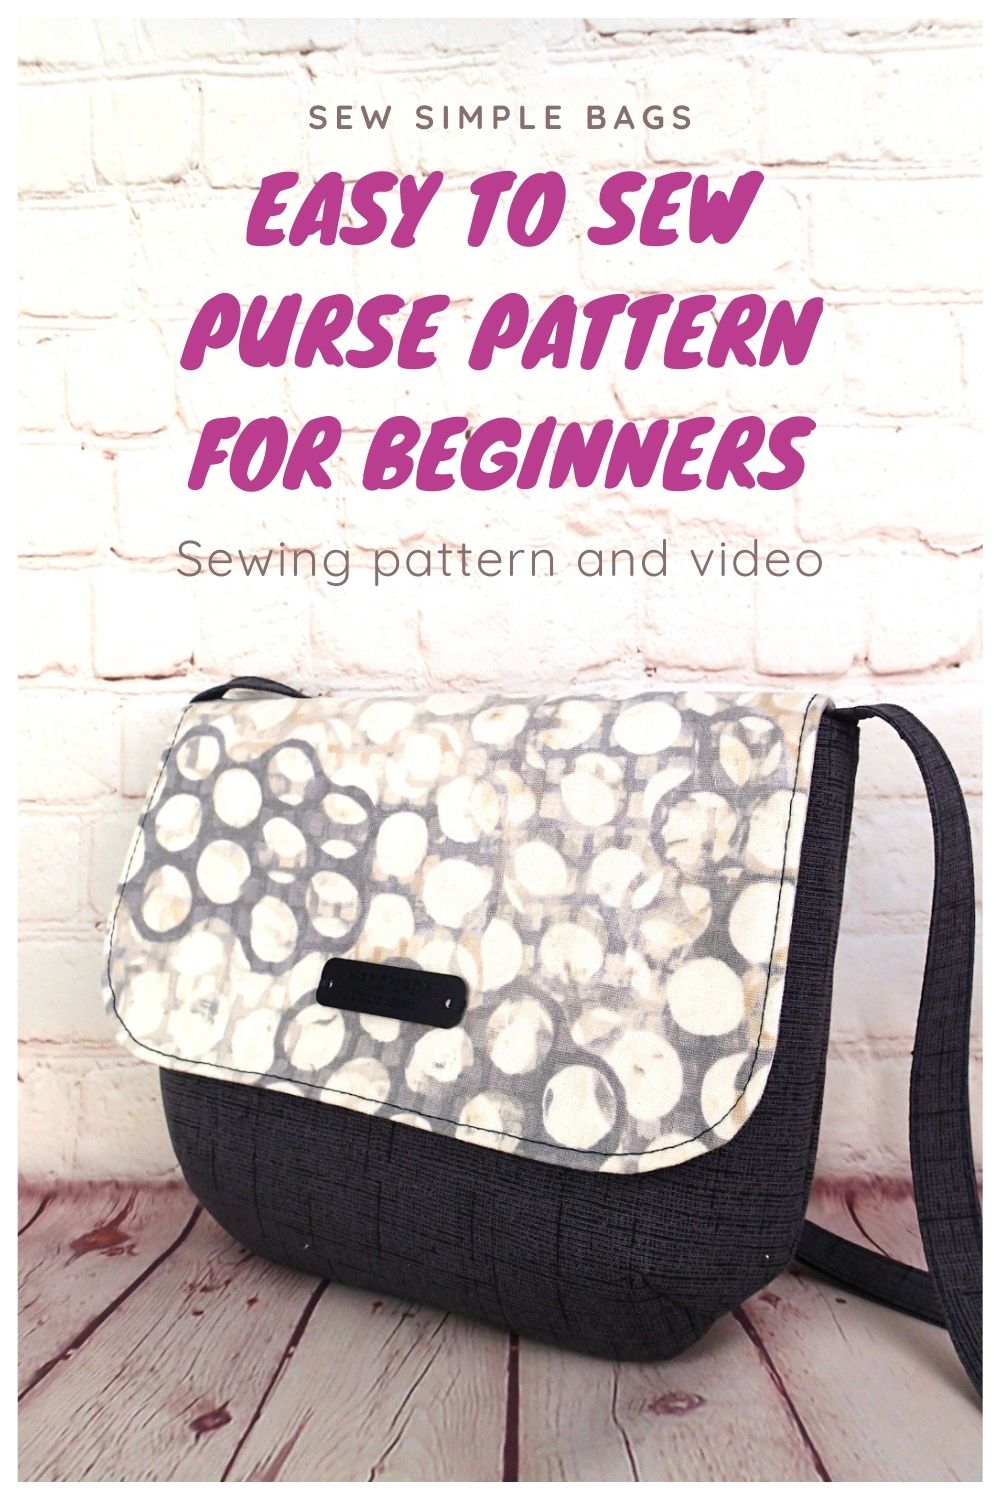 Metal Frame Purse Pattern: How to Make and Test Your Own | So Sew Easy